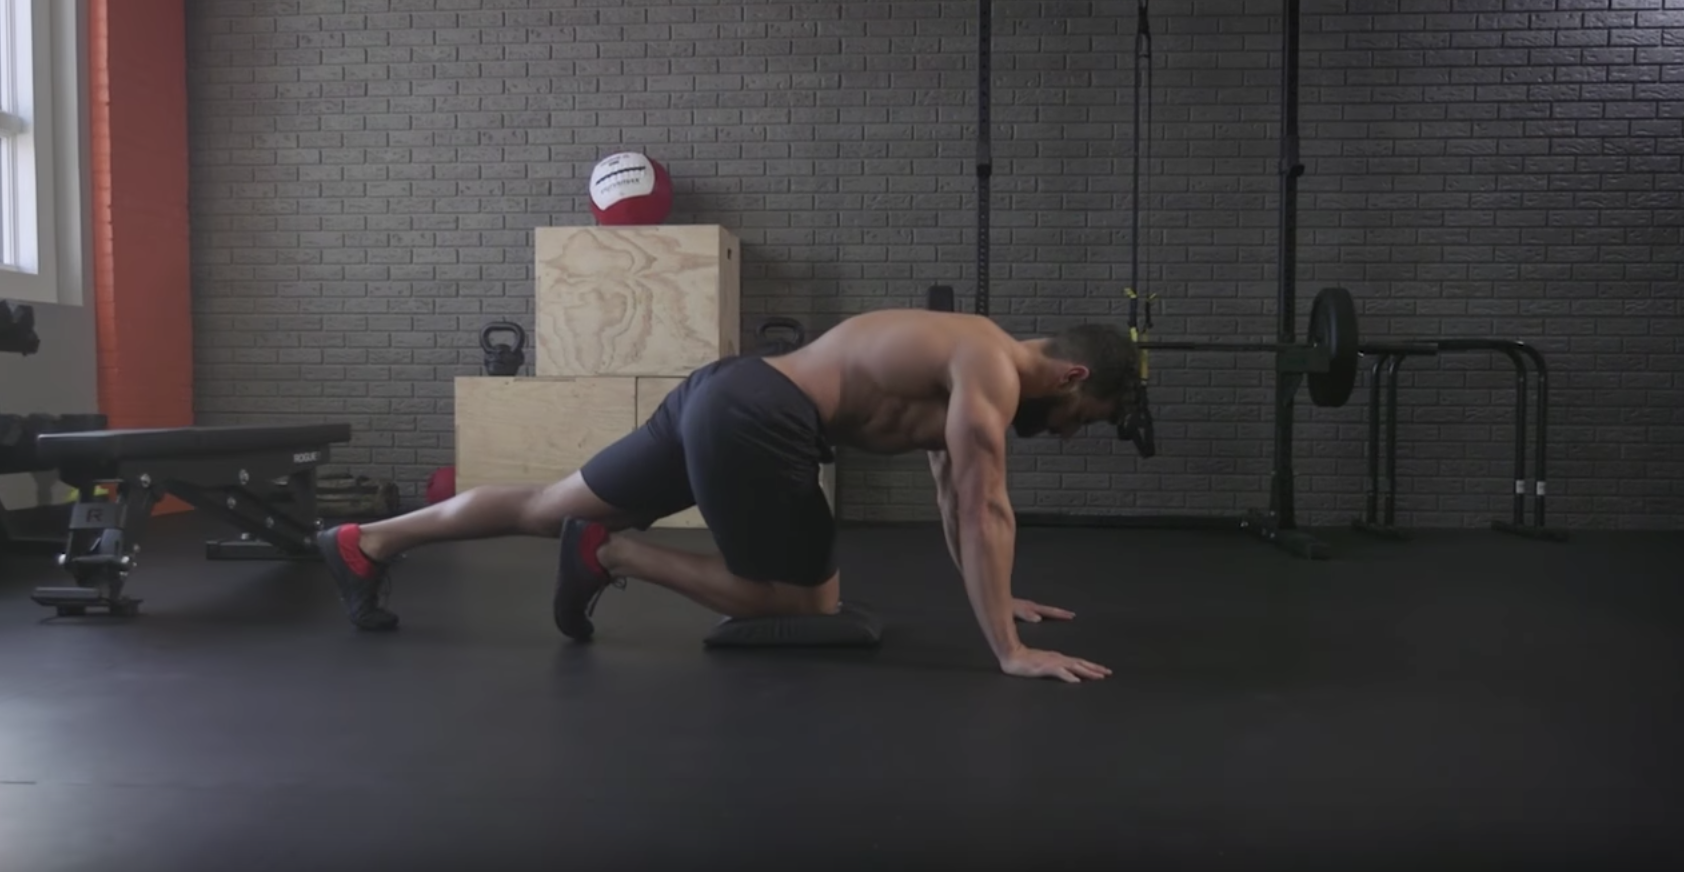 Strengthen your hips and butt to reduce lower back pain | Mueller Sports Medicine